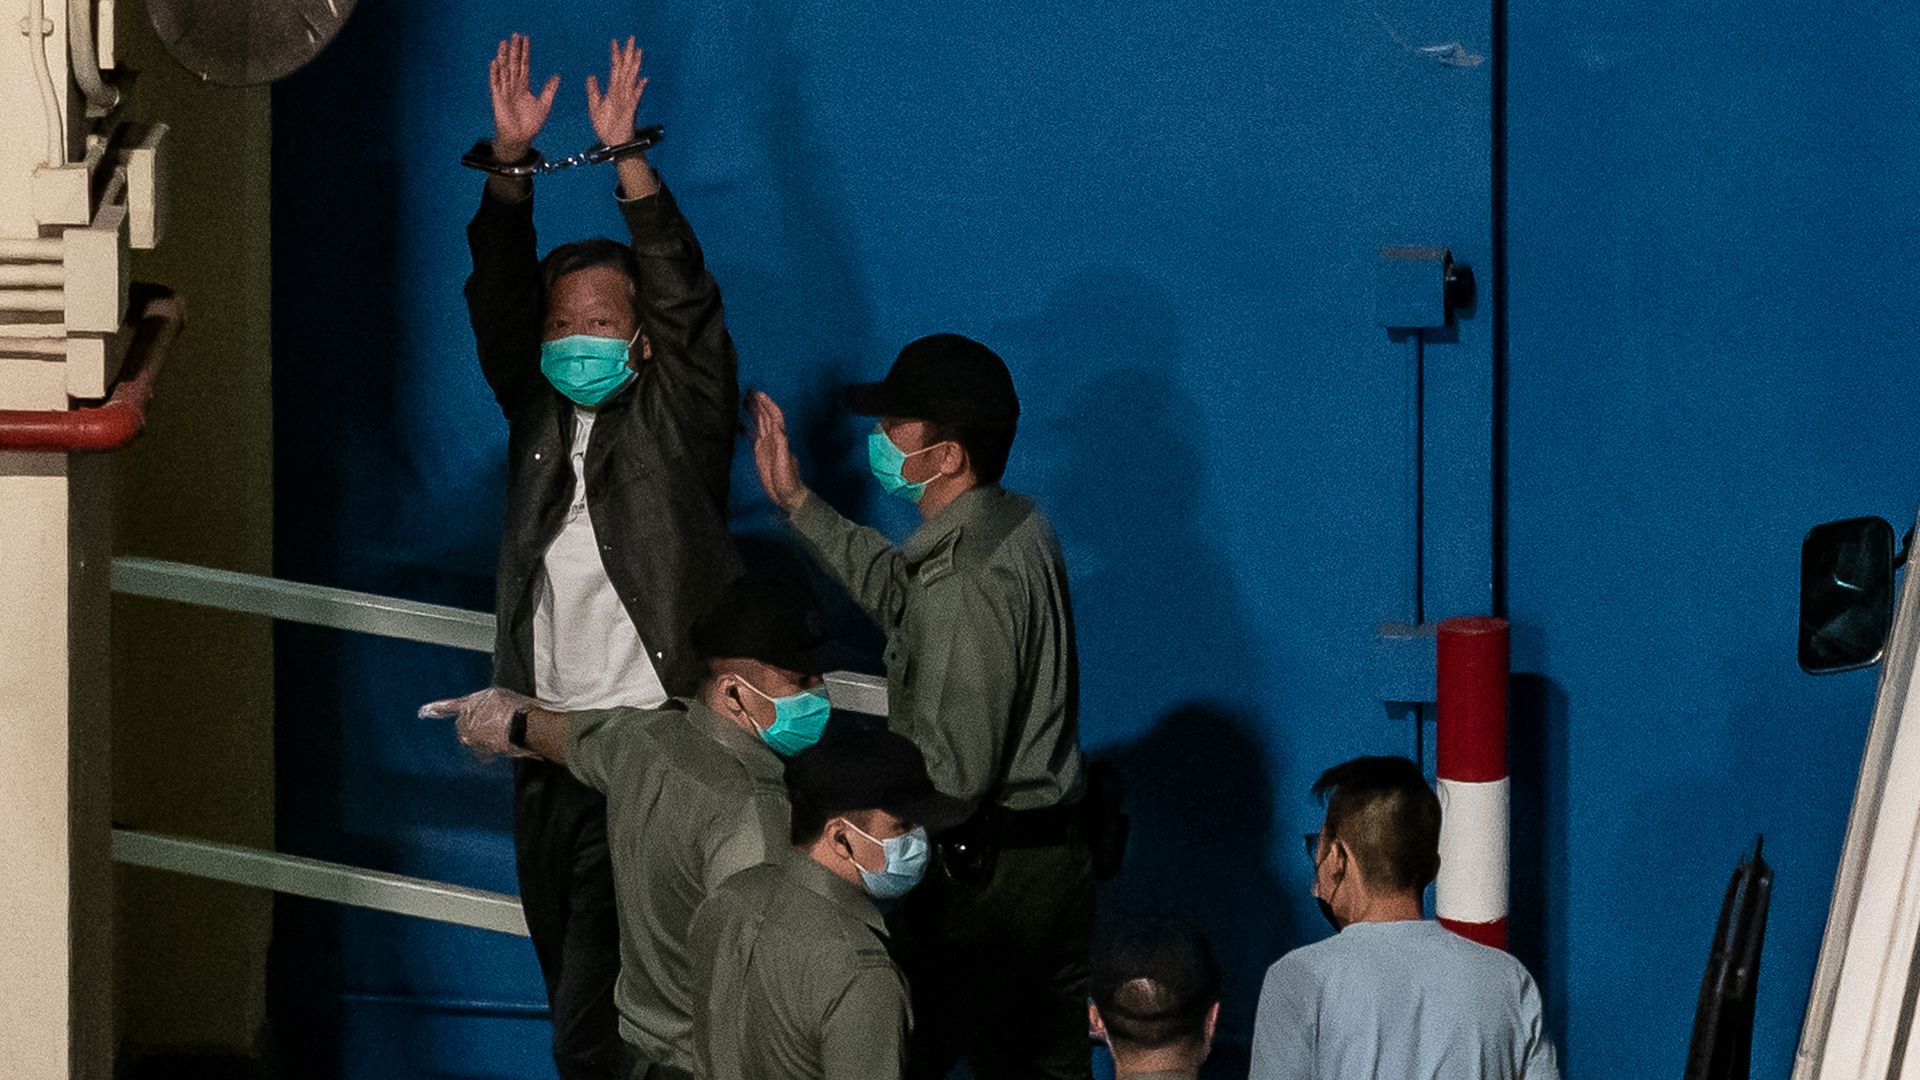 Photo of a person wearing handcuffs and raising their arms high while they are detained by police